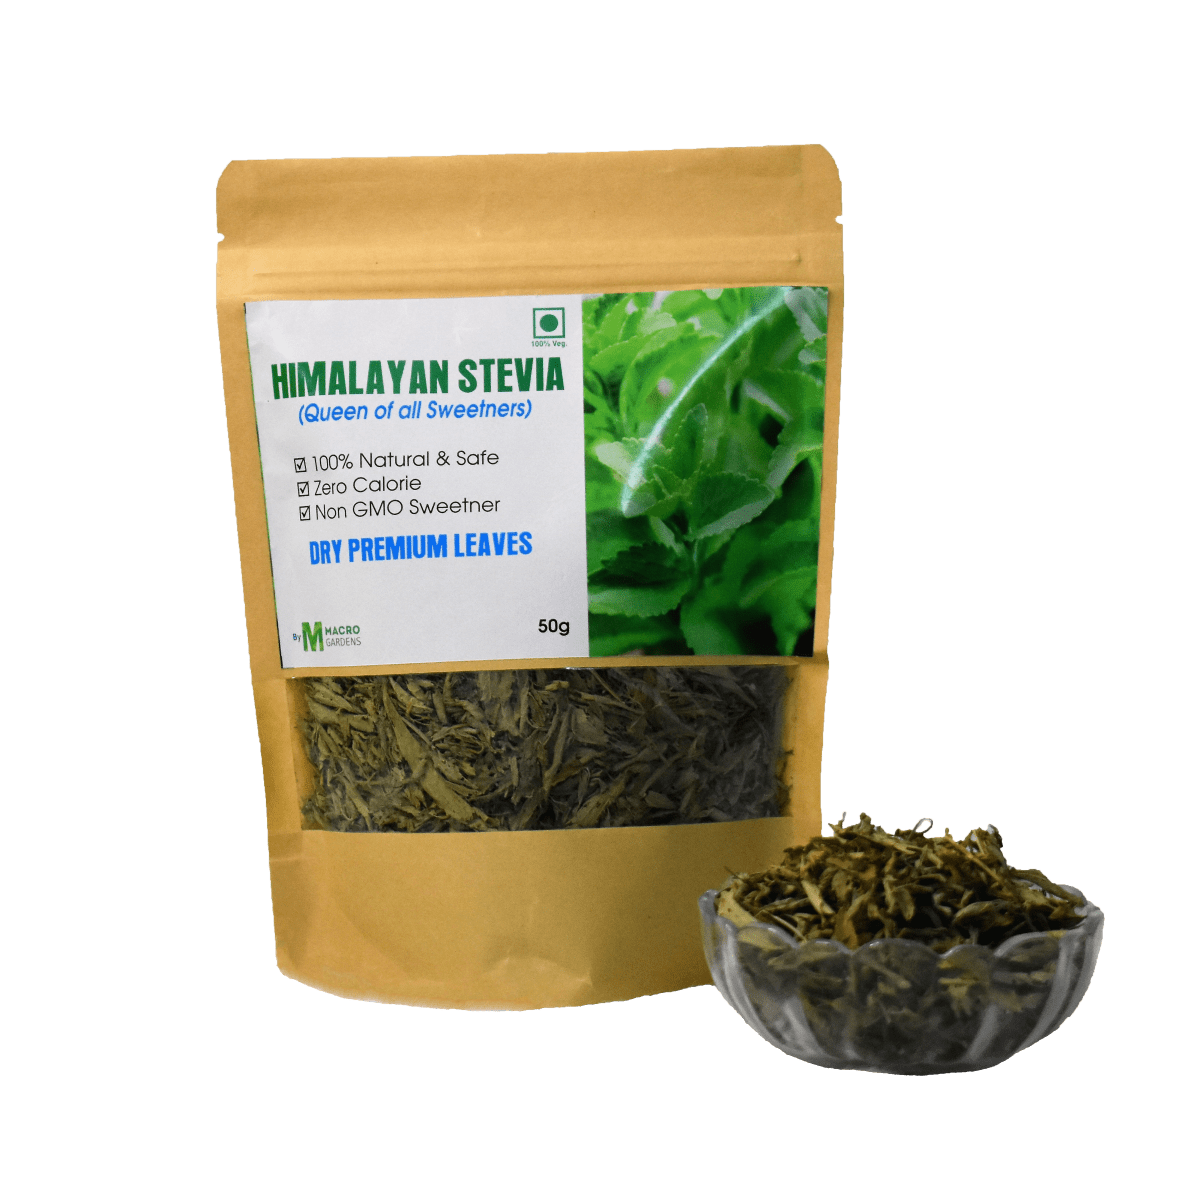 Himalayan Stevia Leaves (Hand-picked Premium Quality)